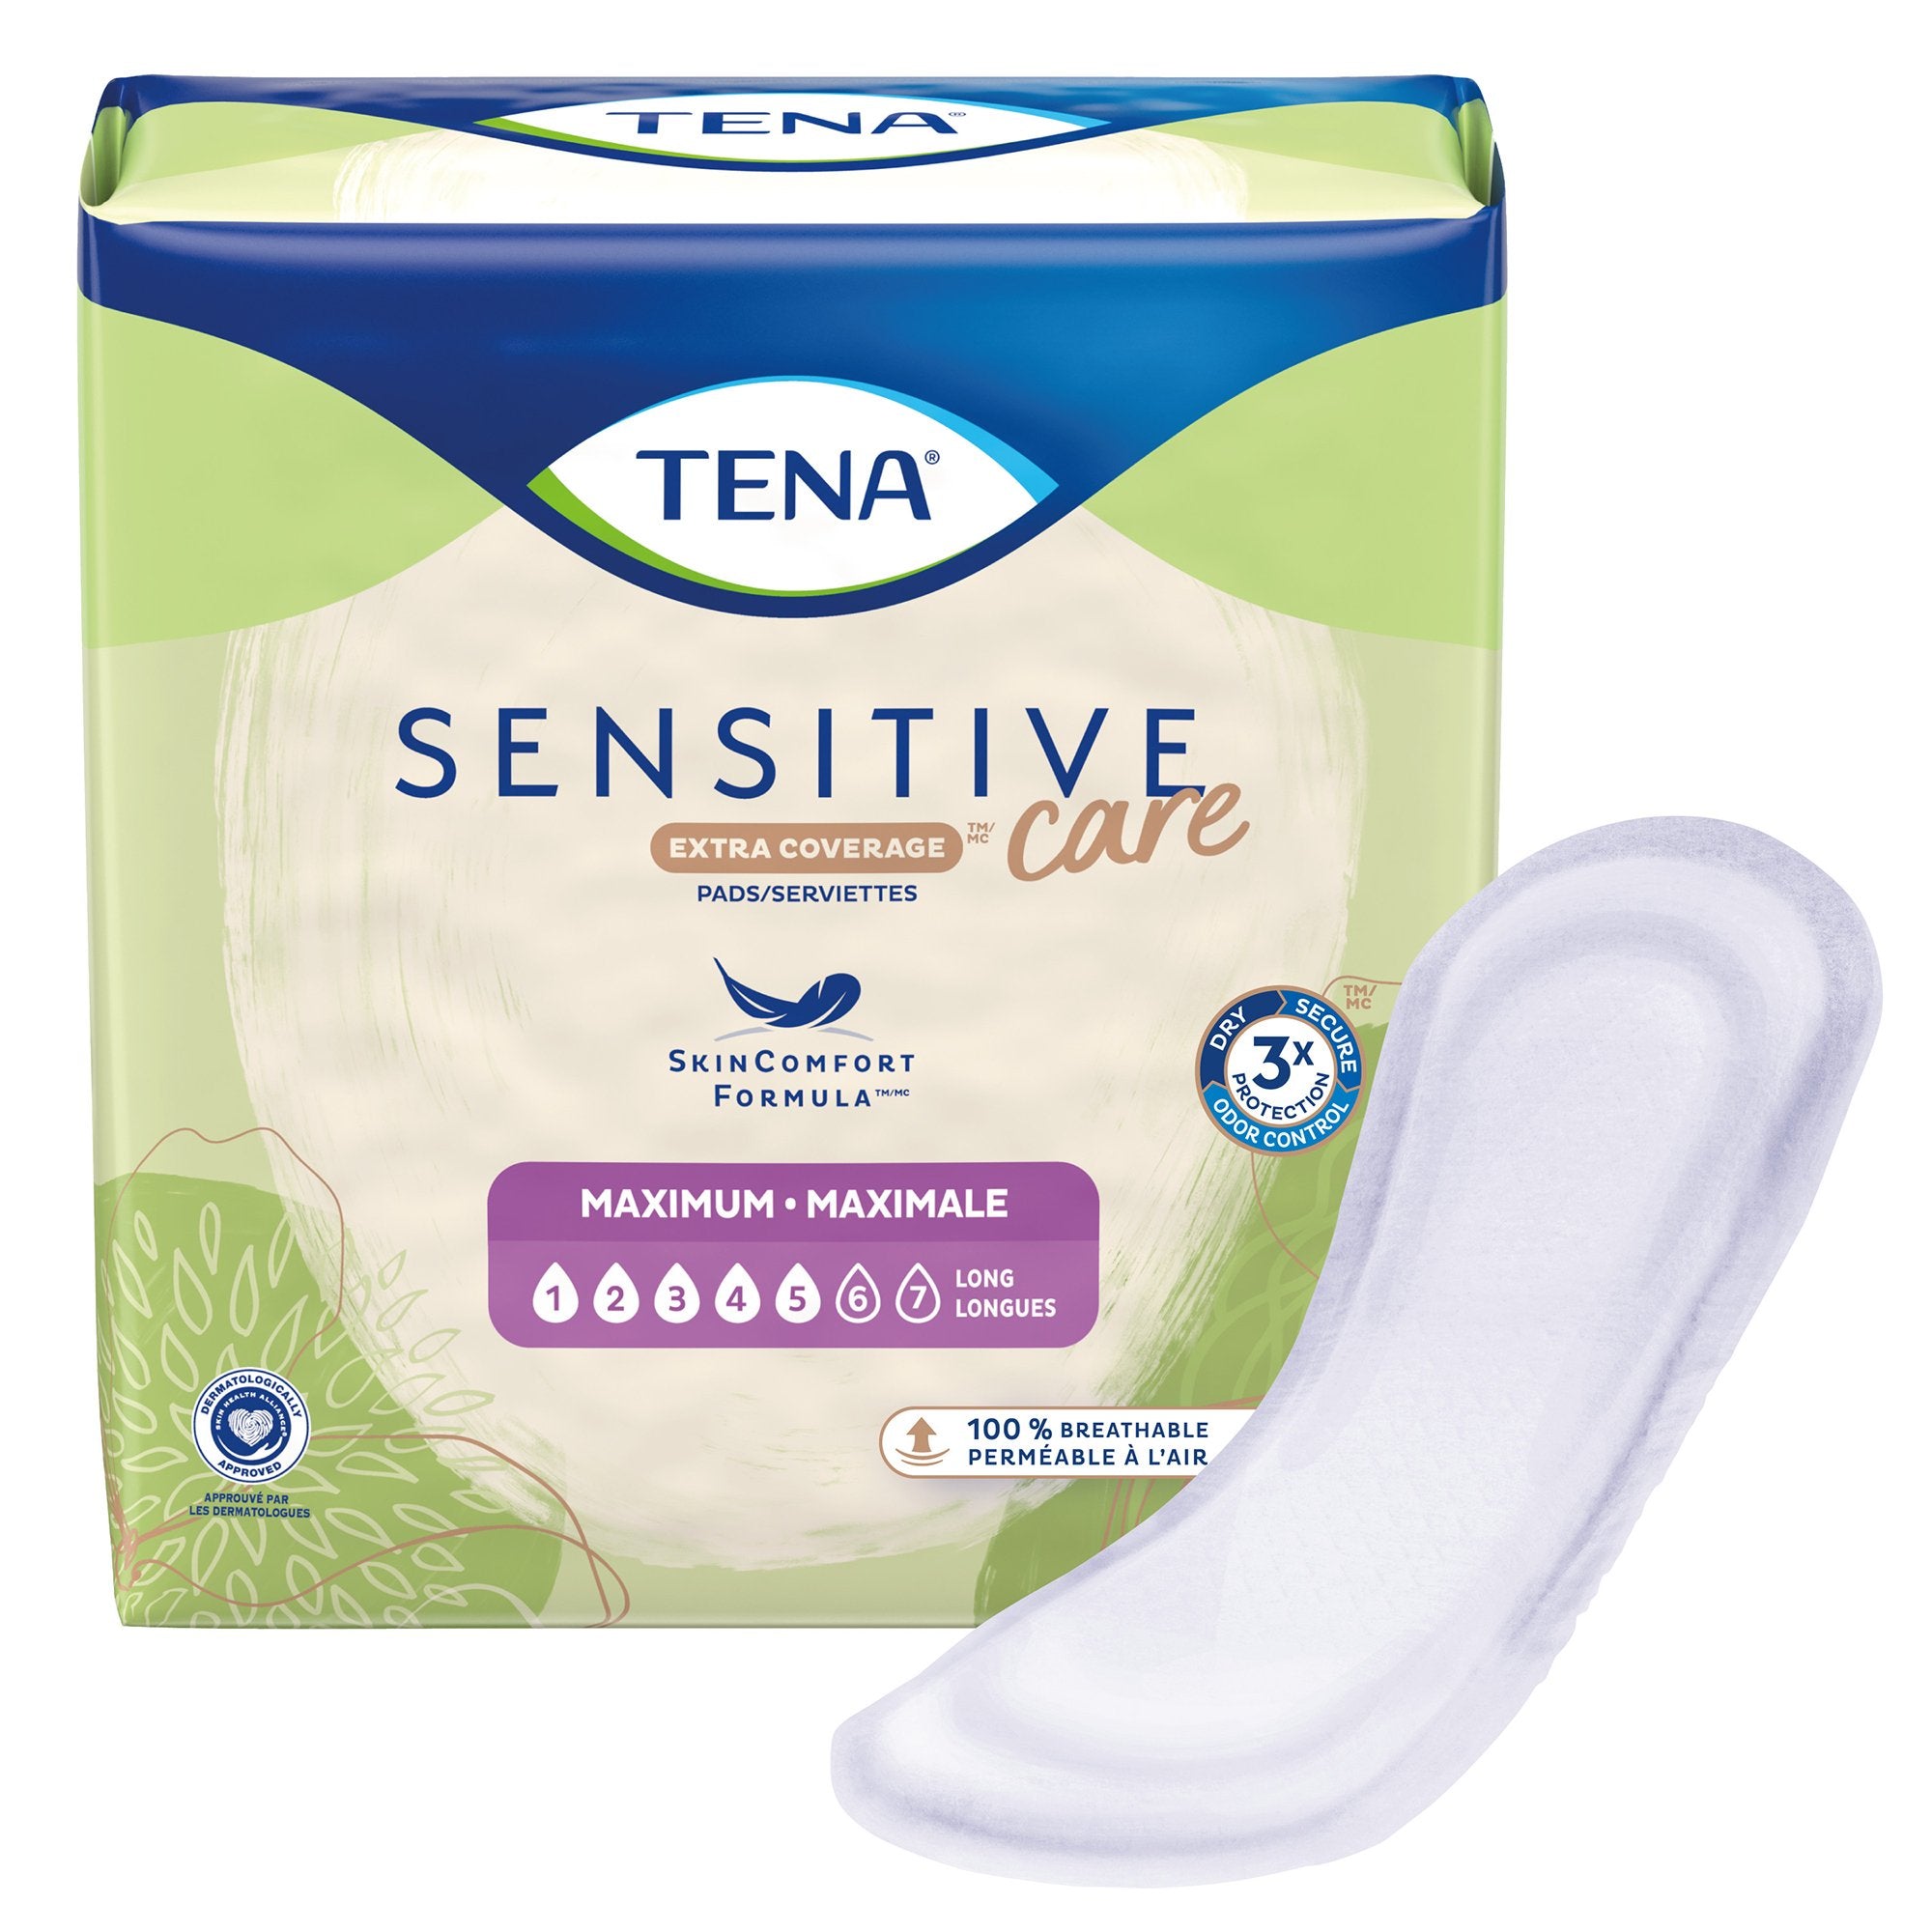 Bladder Control Pad TENA® Sensitive Care Maximum Extra Coverage Long 15 Inch Length Heavy Absorbency Dry-Fast Core™ One Size Fits Most